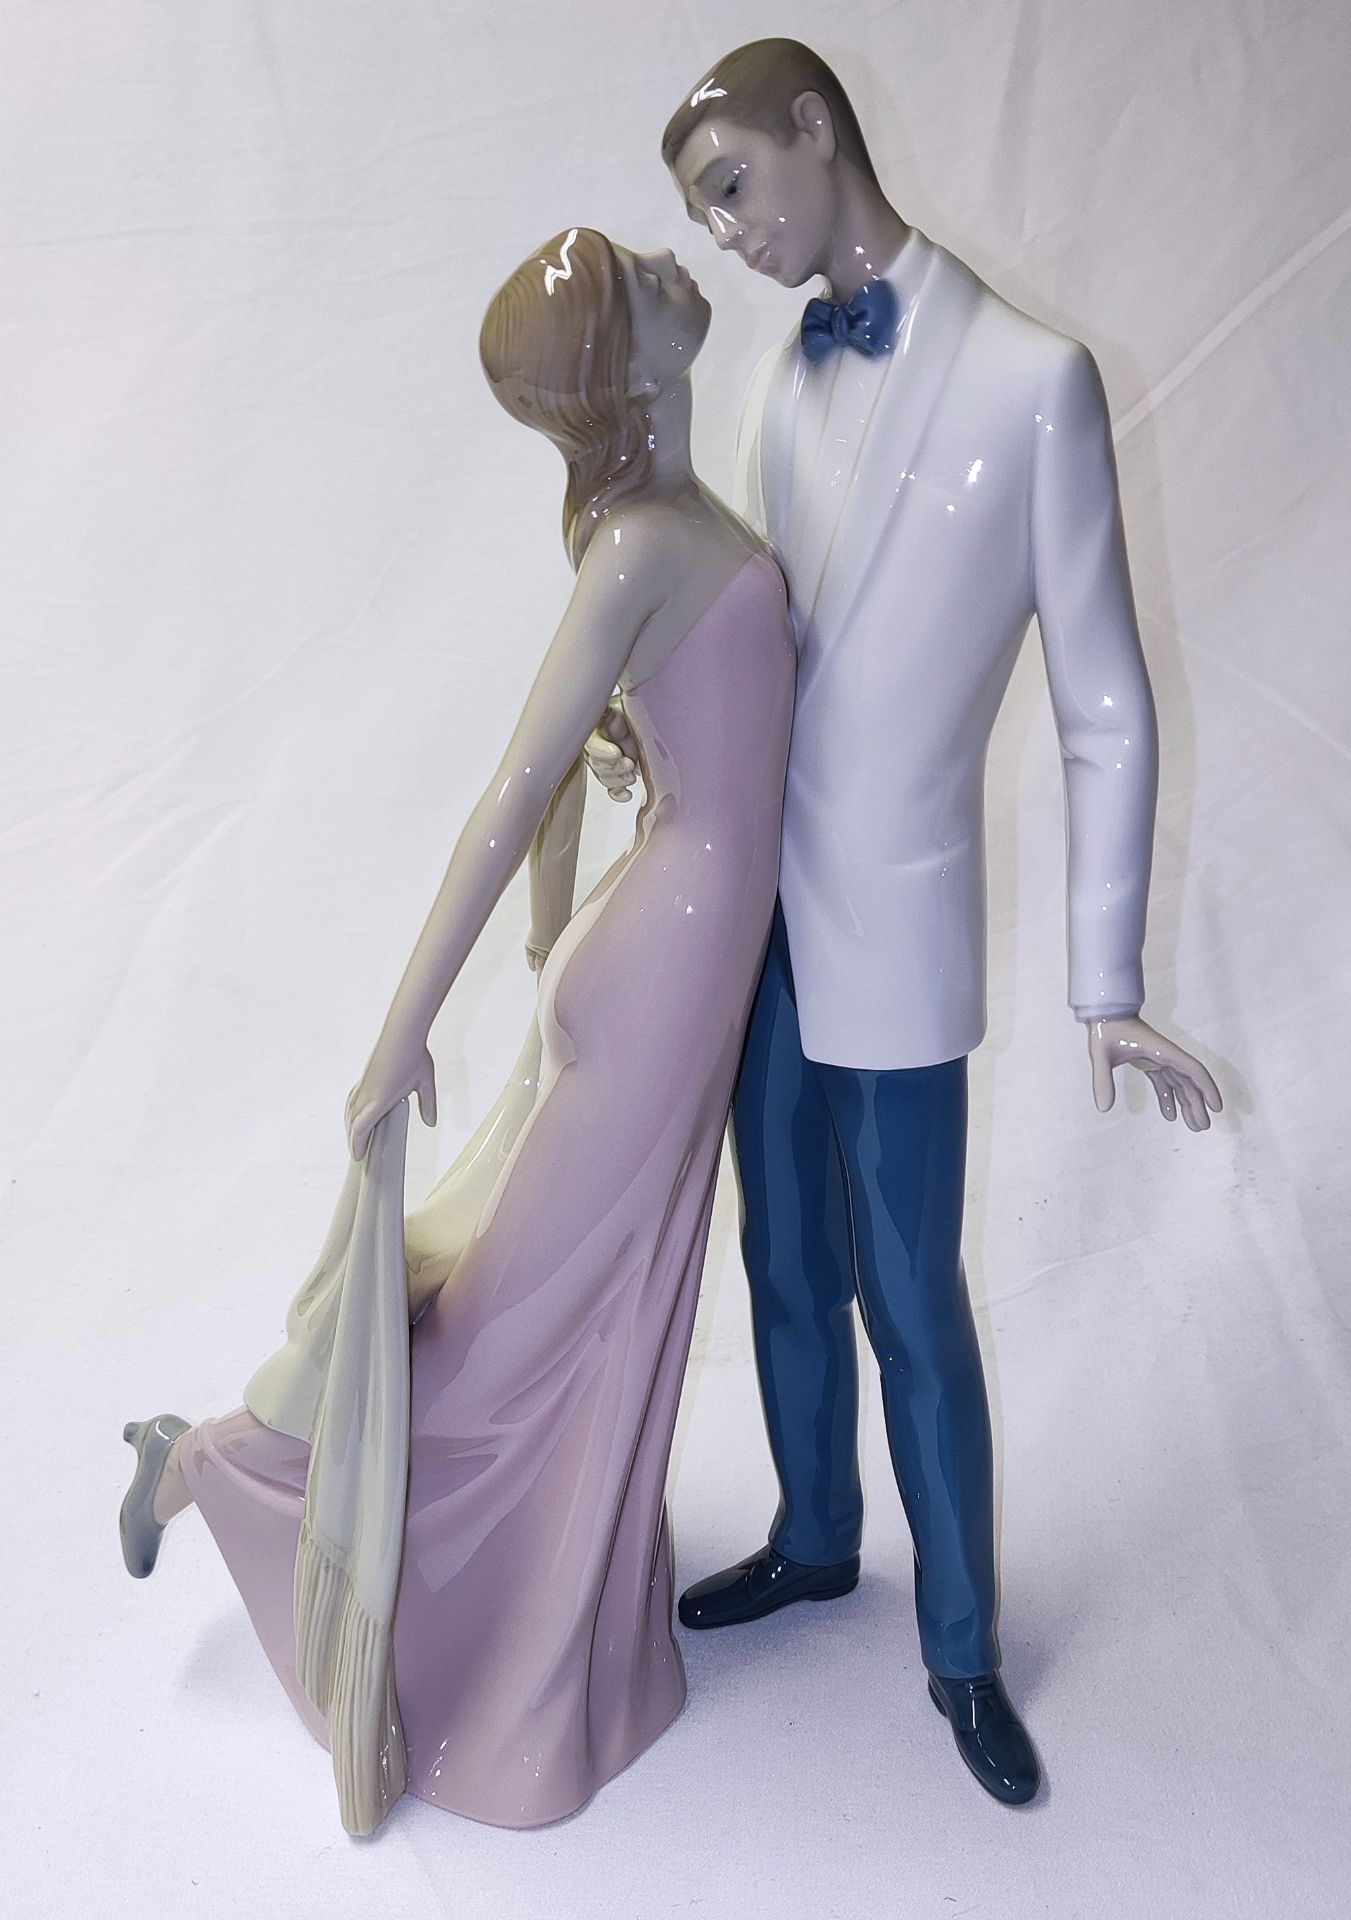 1 x LLADRO Happy Anniversary Porcelain Statue - New/Boxed - RRP £520.00 - Ref: /HOC232/HC5 - CL987 - - Image 3 of 25